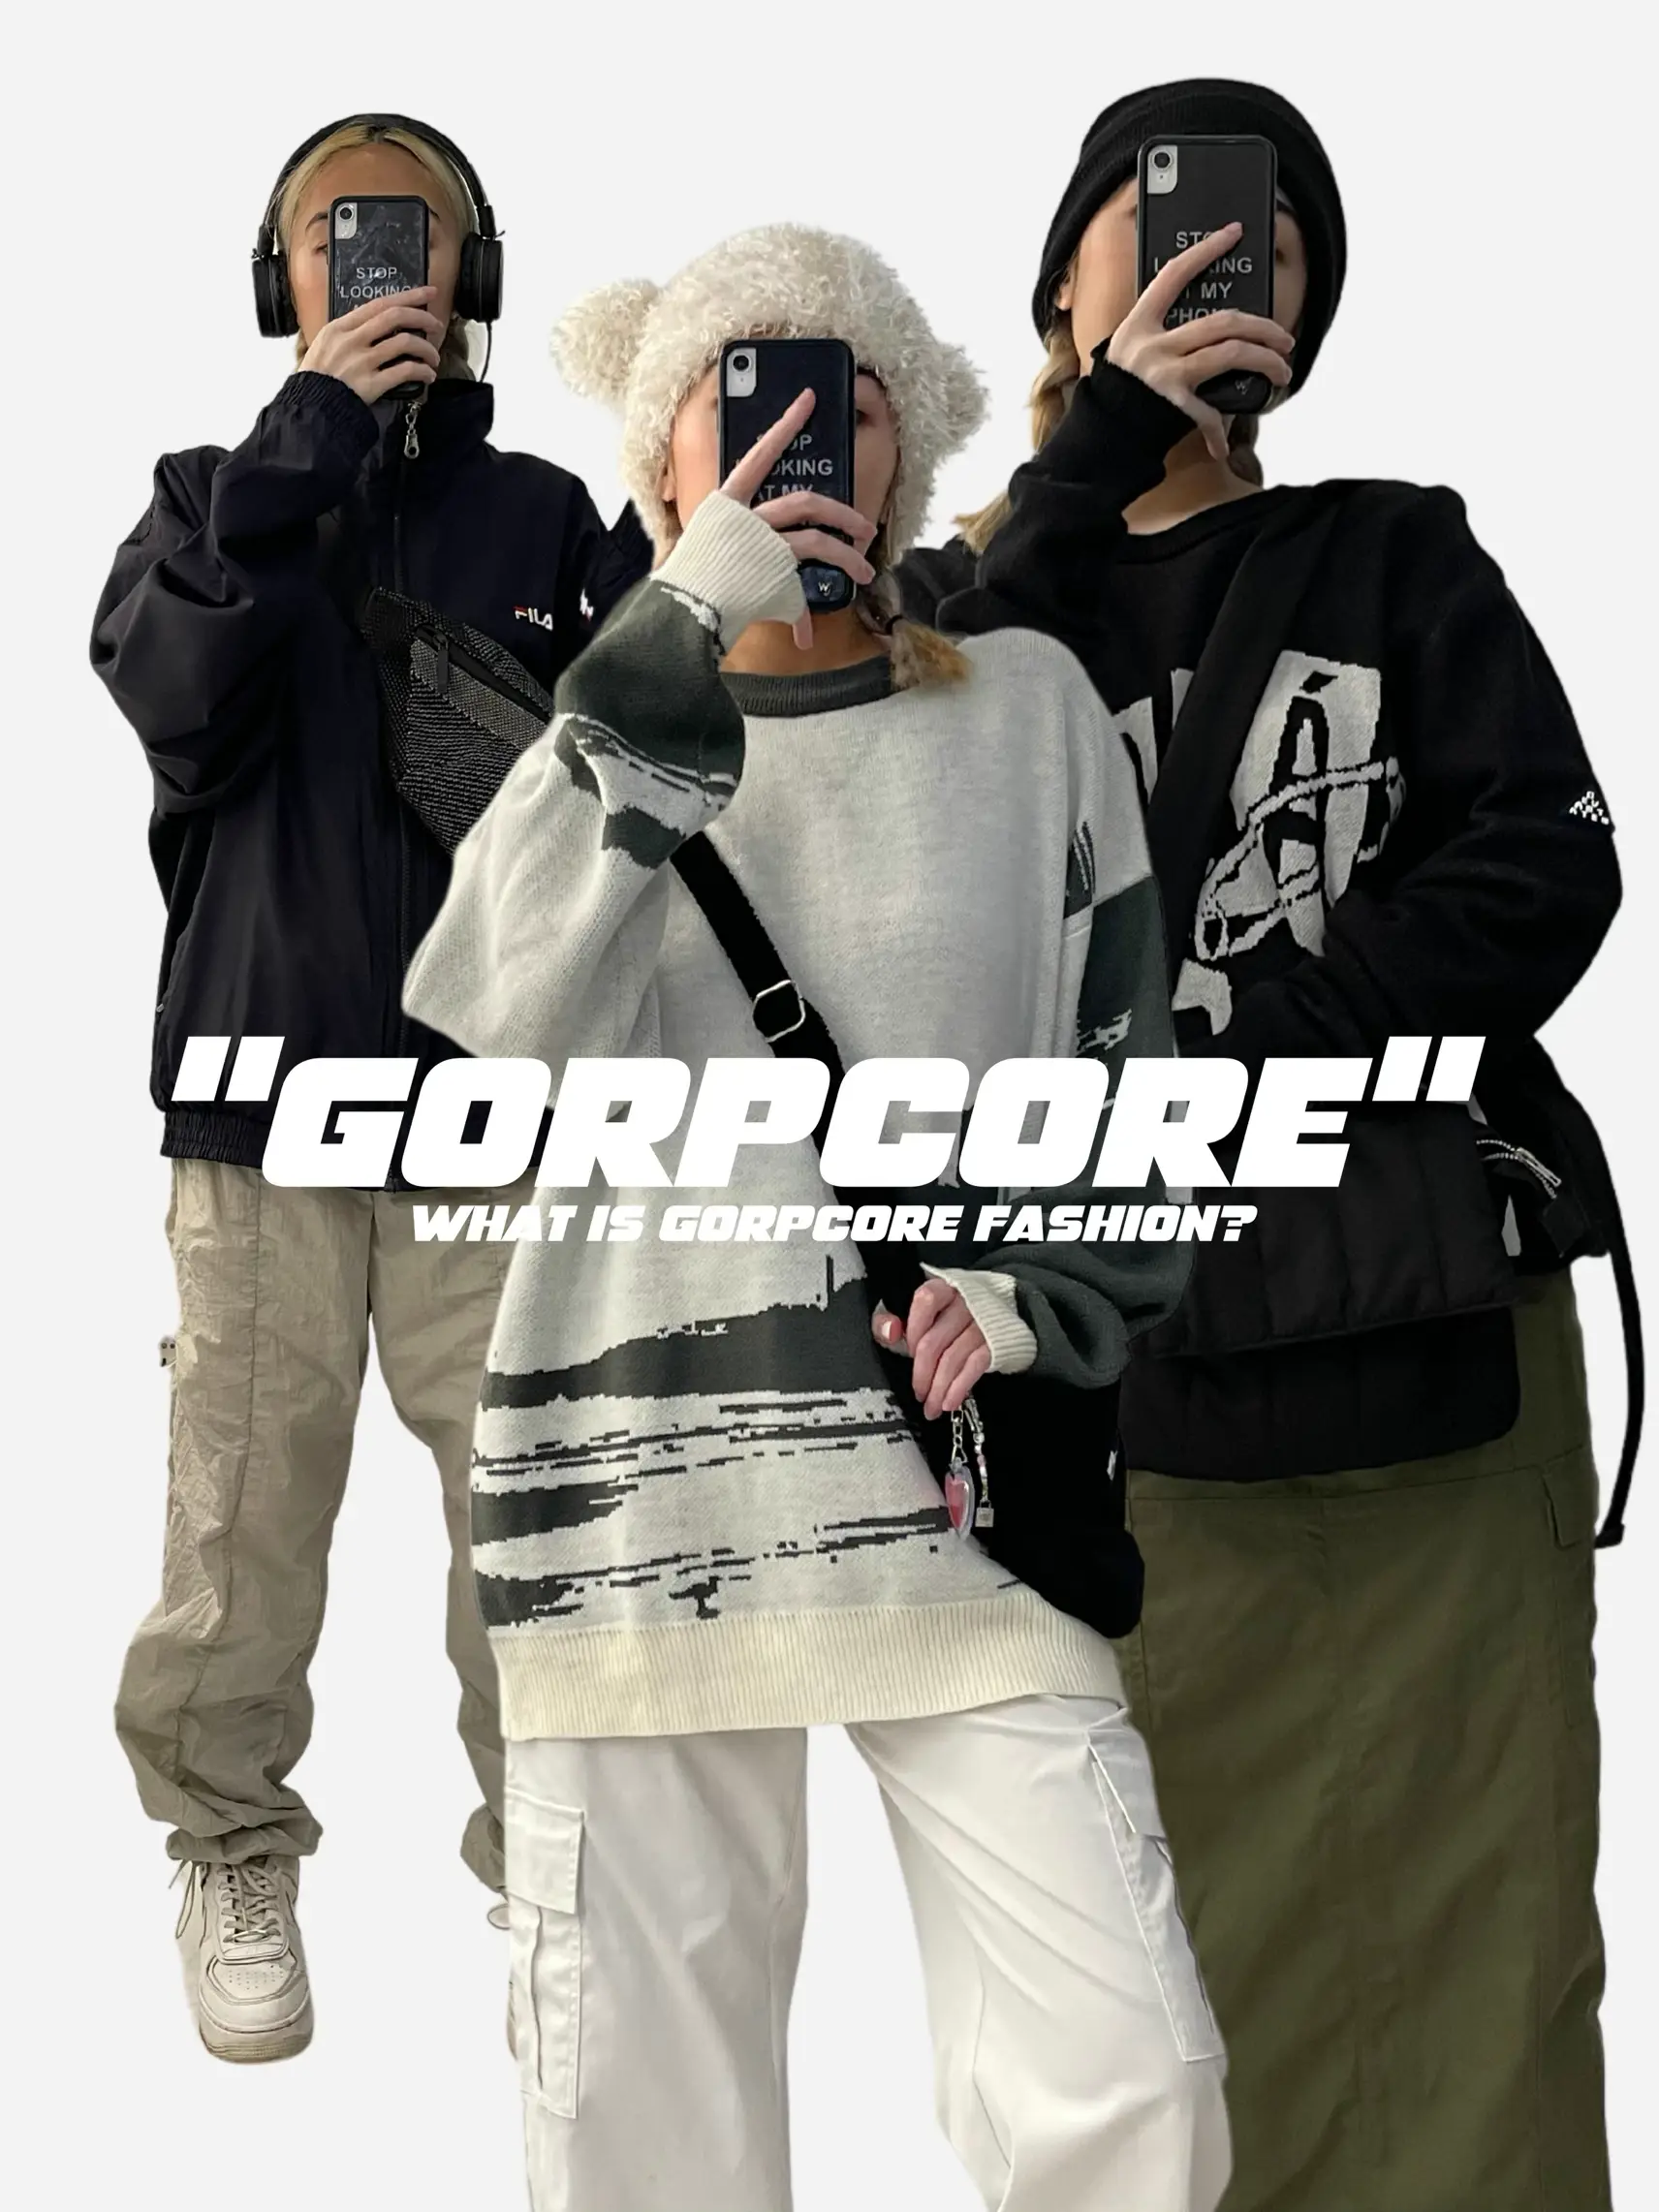 Three people standing next to each other, all wearing different styles of Gorpcore clothing. - Gorpcore